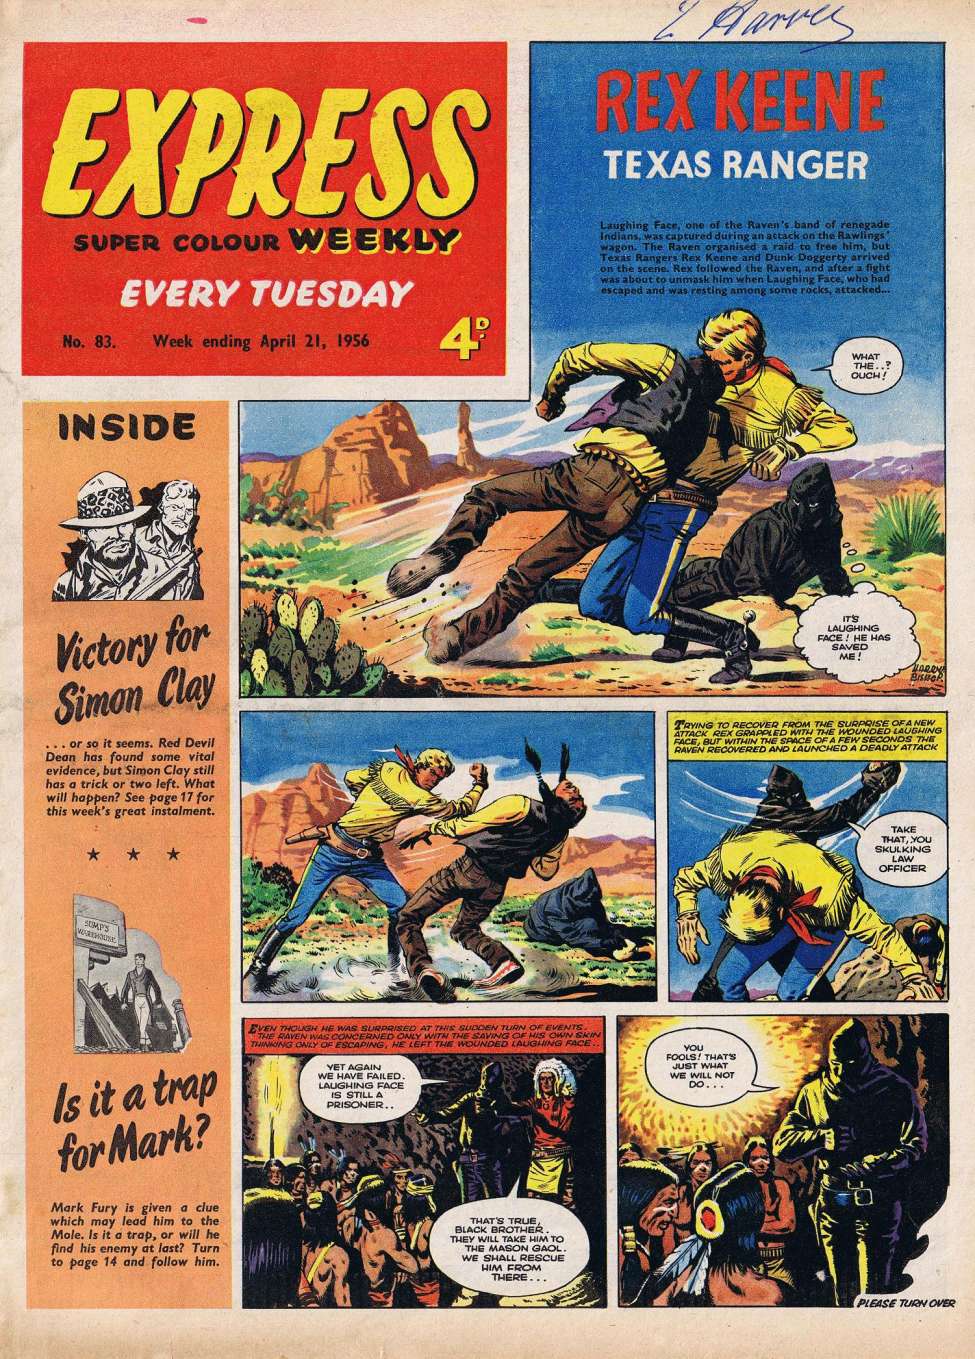 Comic Book Cover For Express Weekly 83